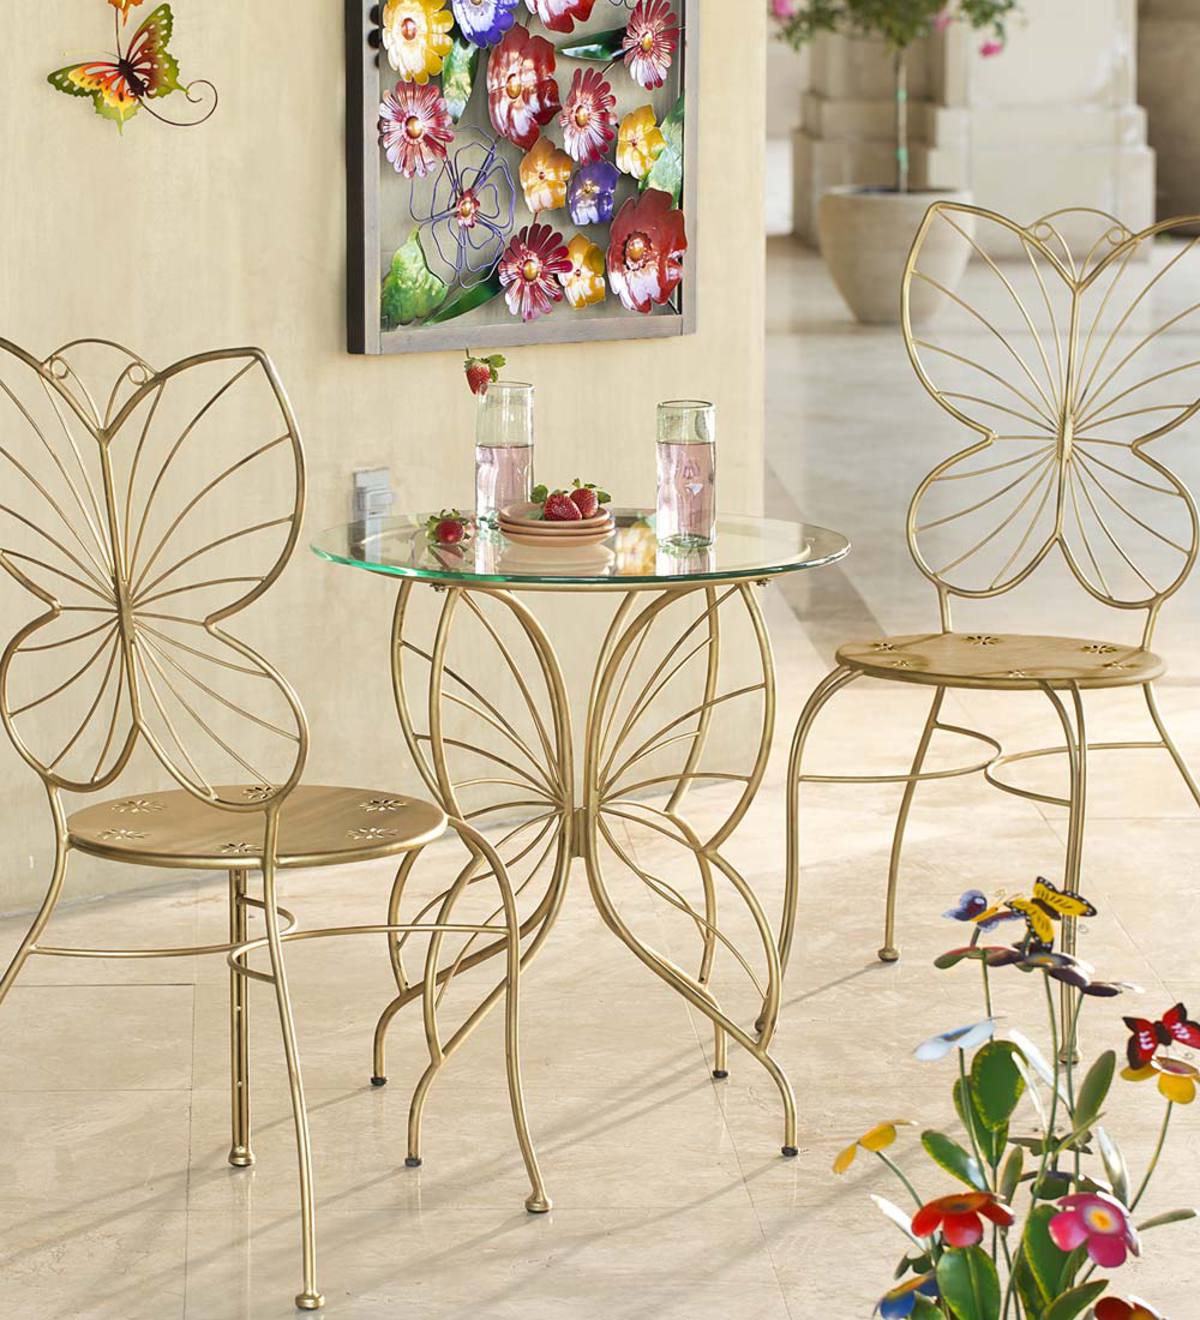 Butterfly Table and Chairs Set